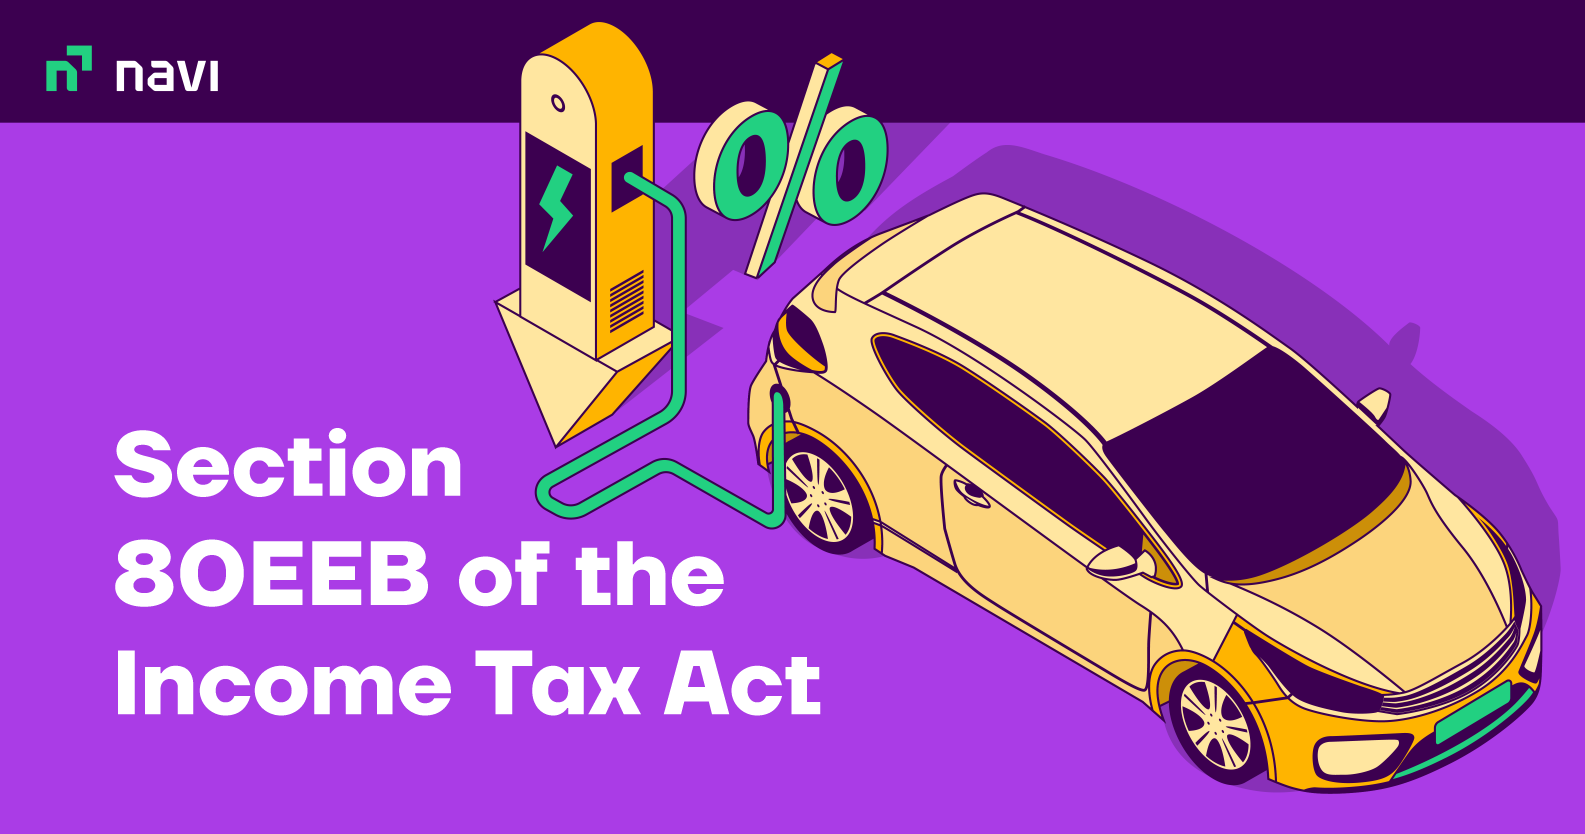 Section 80EEB of the Income Tax Act